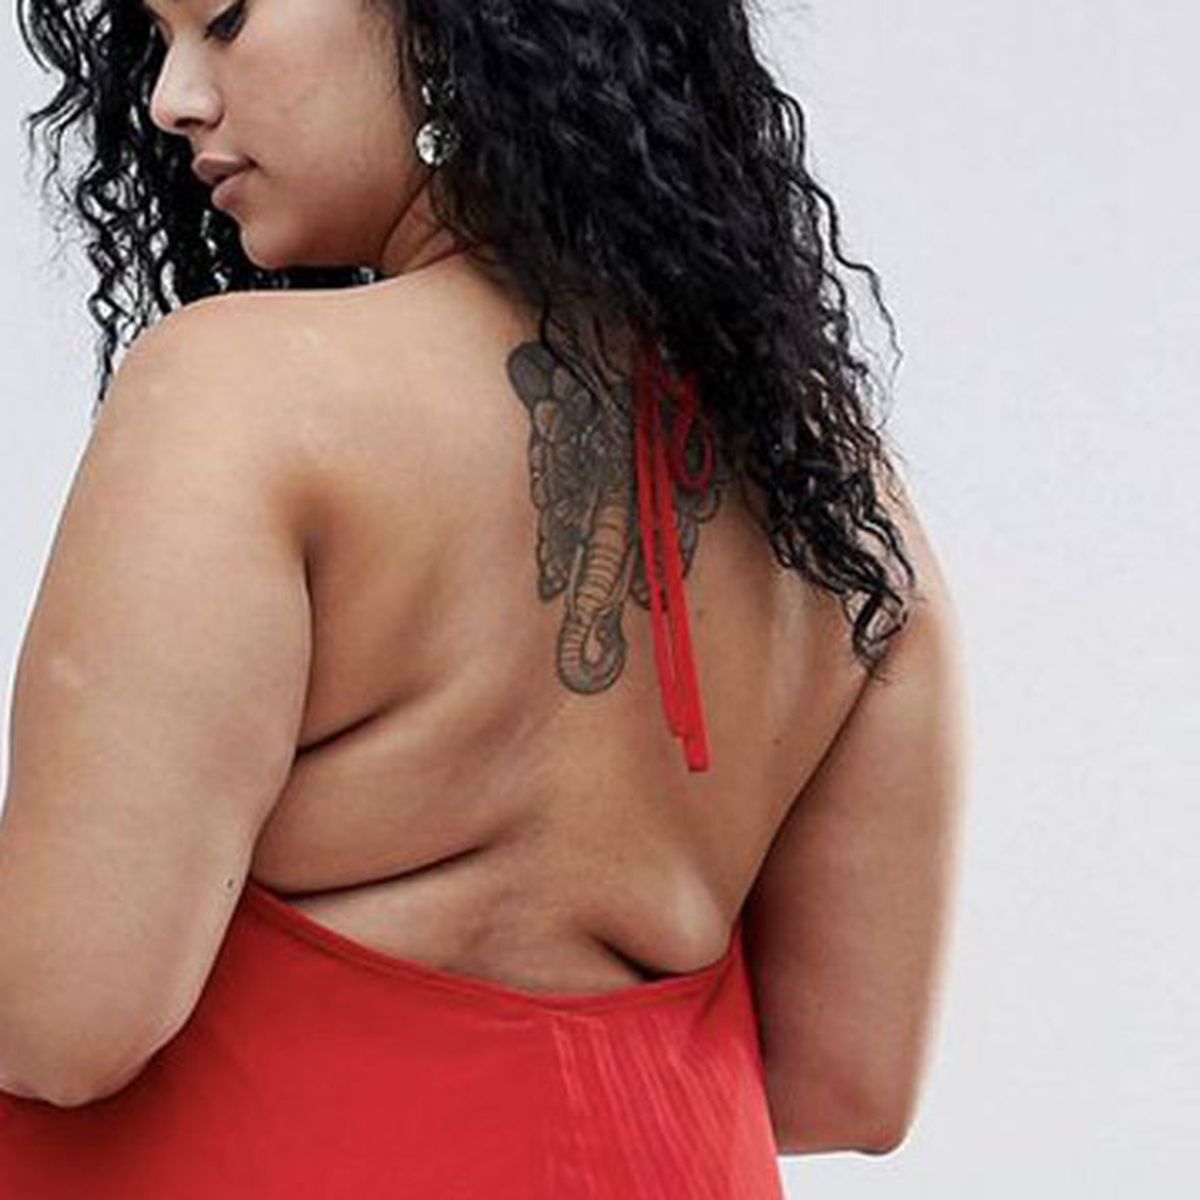 ASOS Featured a Model's Back Rolls, and Twitter Is Loving It